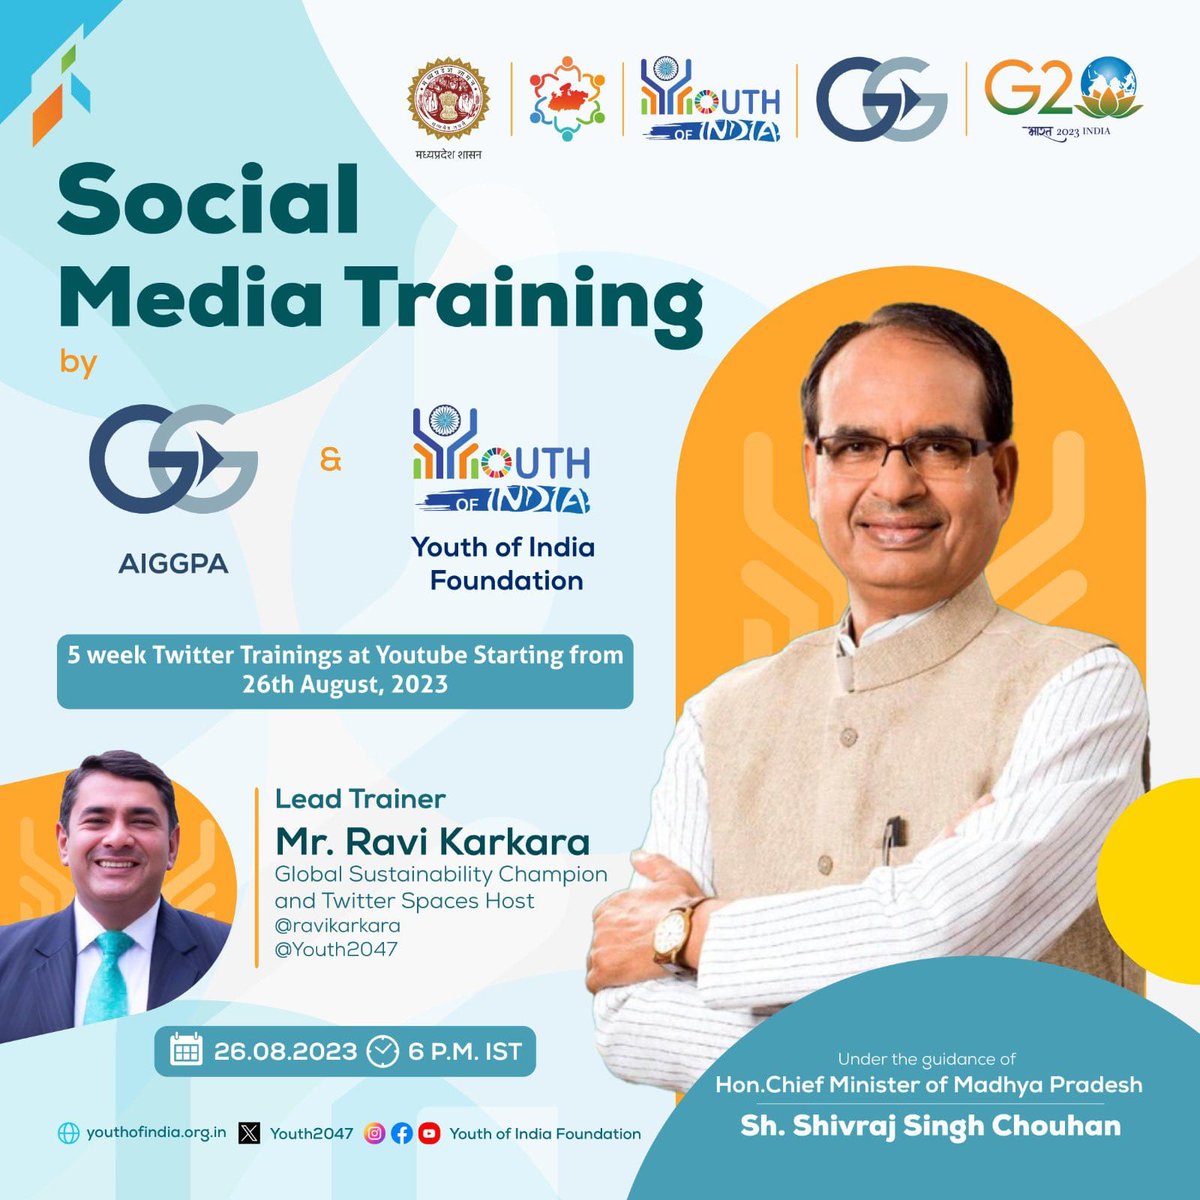 @AIGGPA is collaborating with Youth of India @Youth2047 for Chief Minister's @ChouhanShivraj @cmYouthInternship Programme @CMYIP_ to train in Social Media by Global Expert @ravikarkara

Gain Skills to become #DigitalCitizen @Rajeev_GoI @Connect_Lokesh @SinghalSailesh @X @elonmus